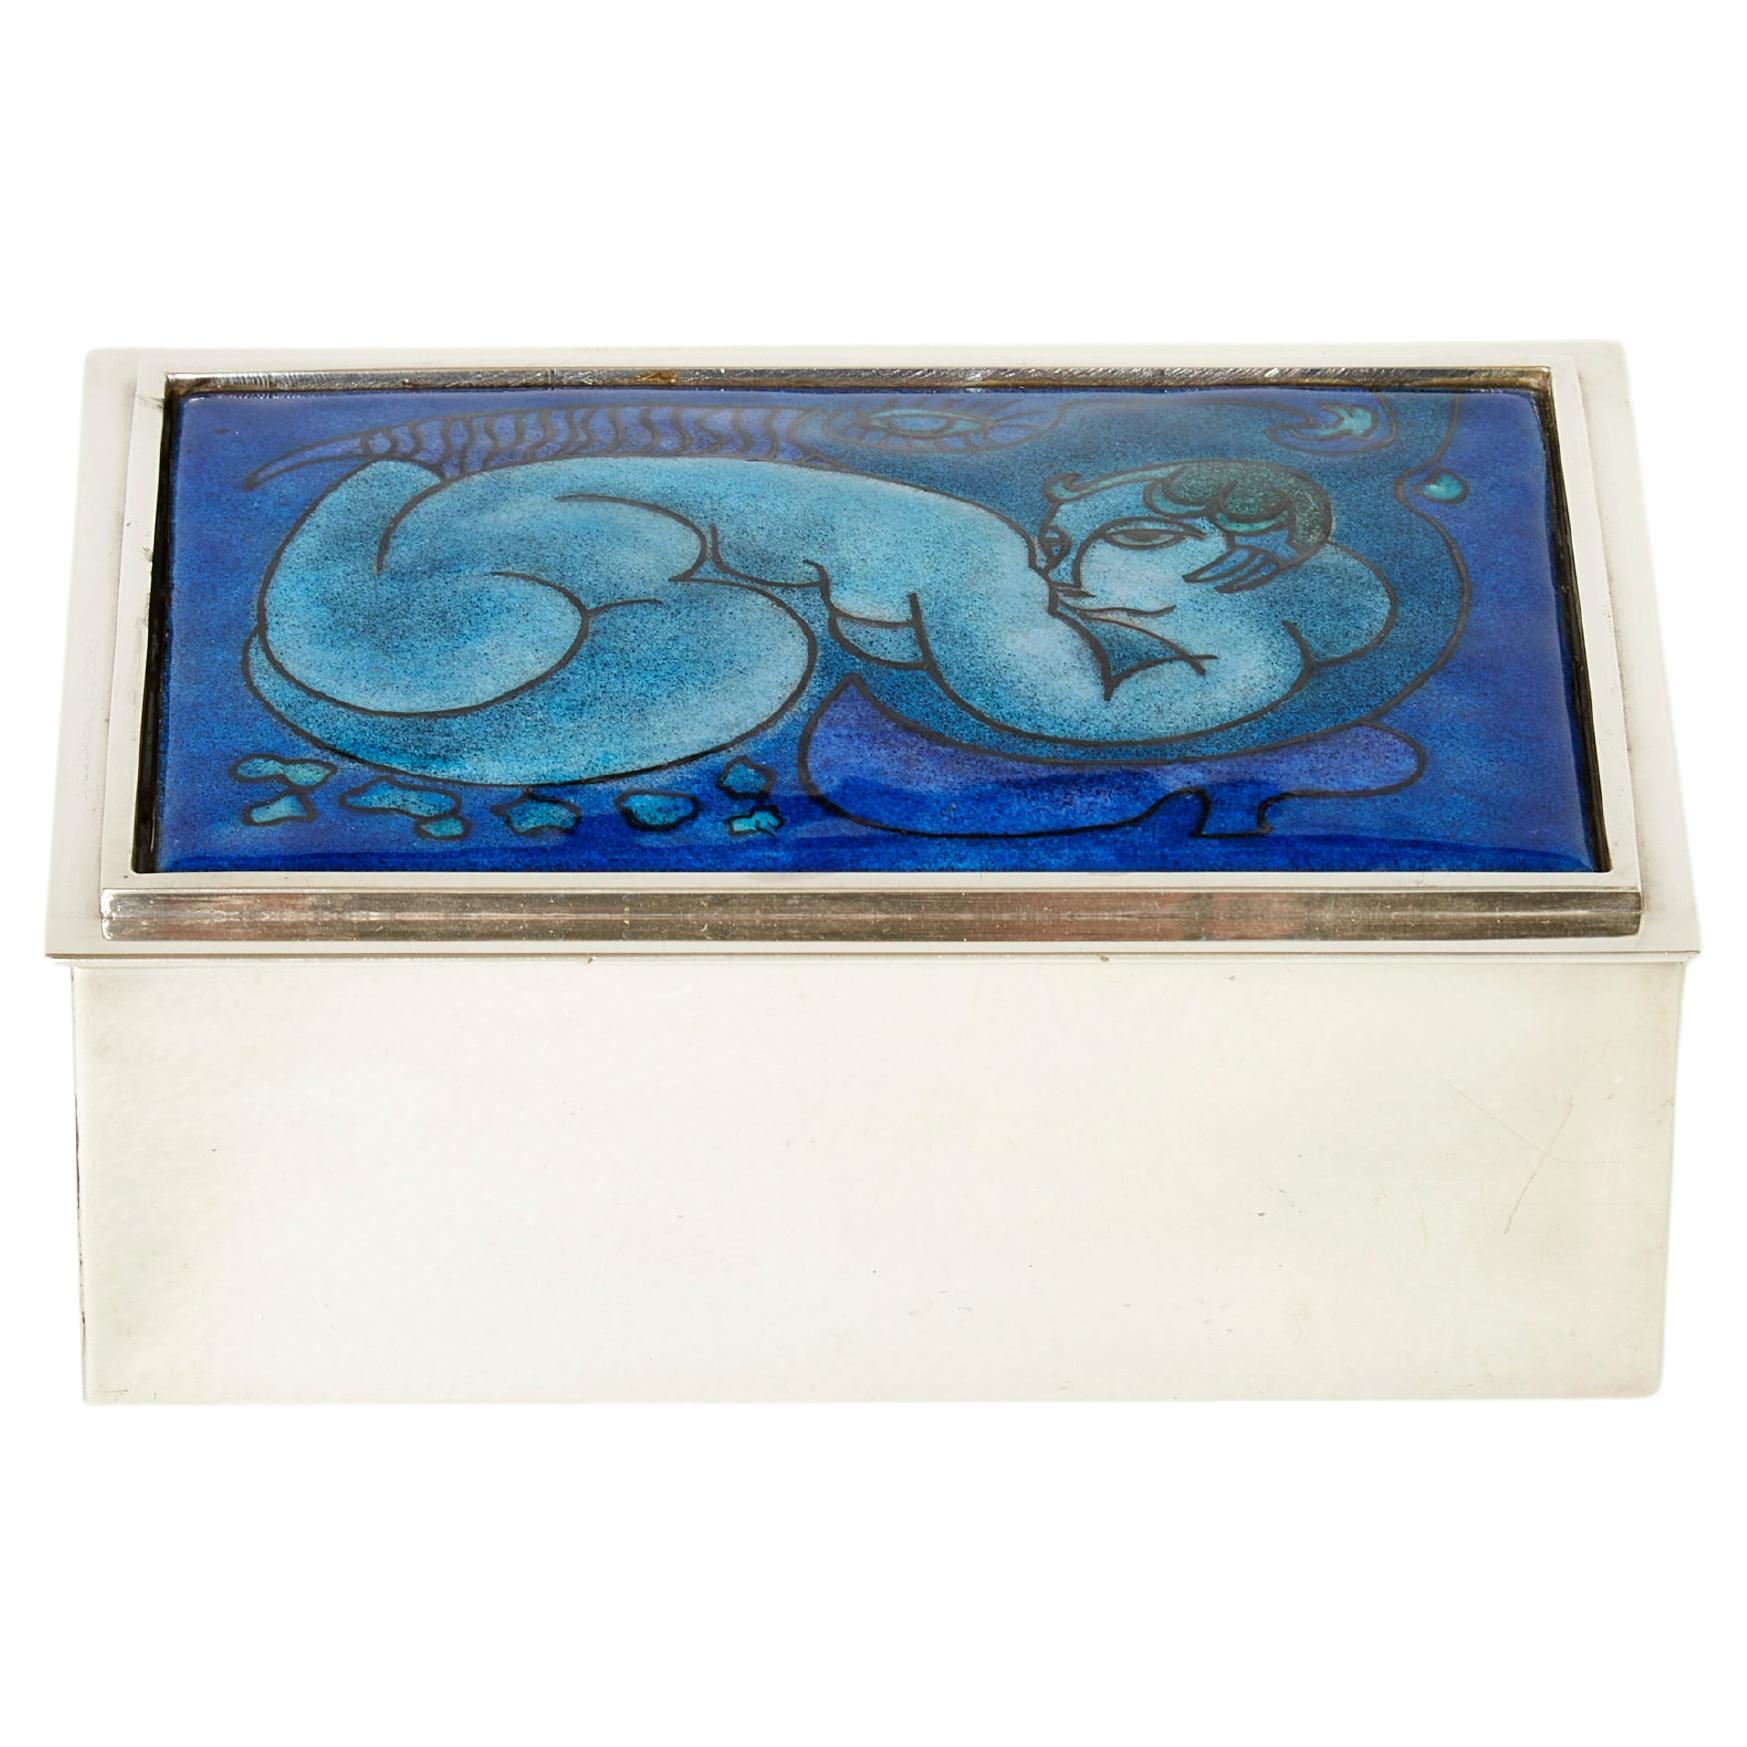 Crevillen Paris Silvered and Enameled Blue Ceramic Jewellery Box 1970 For Sale